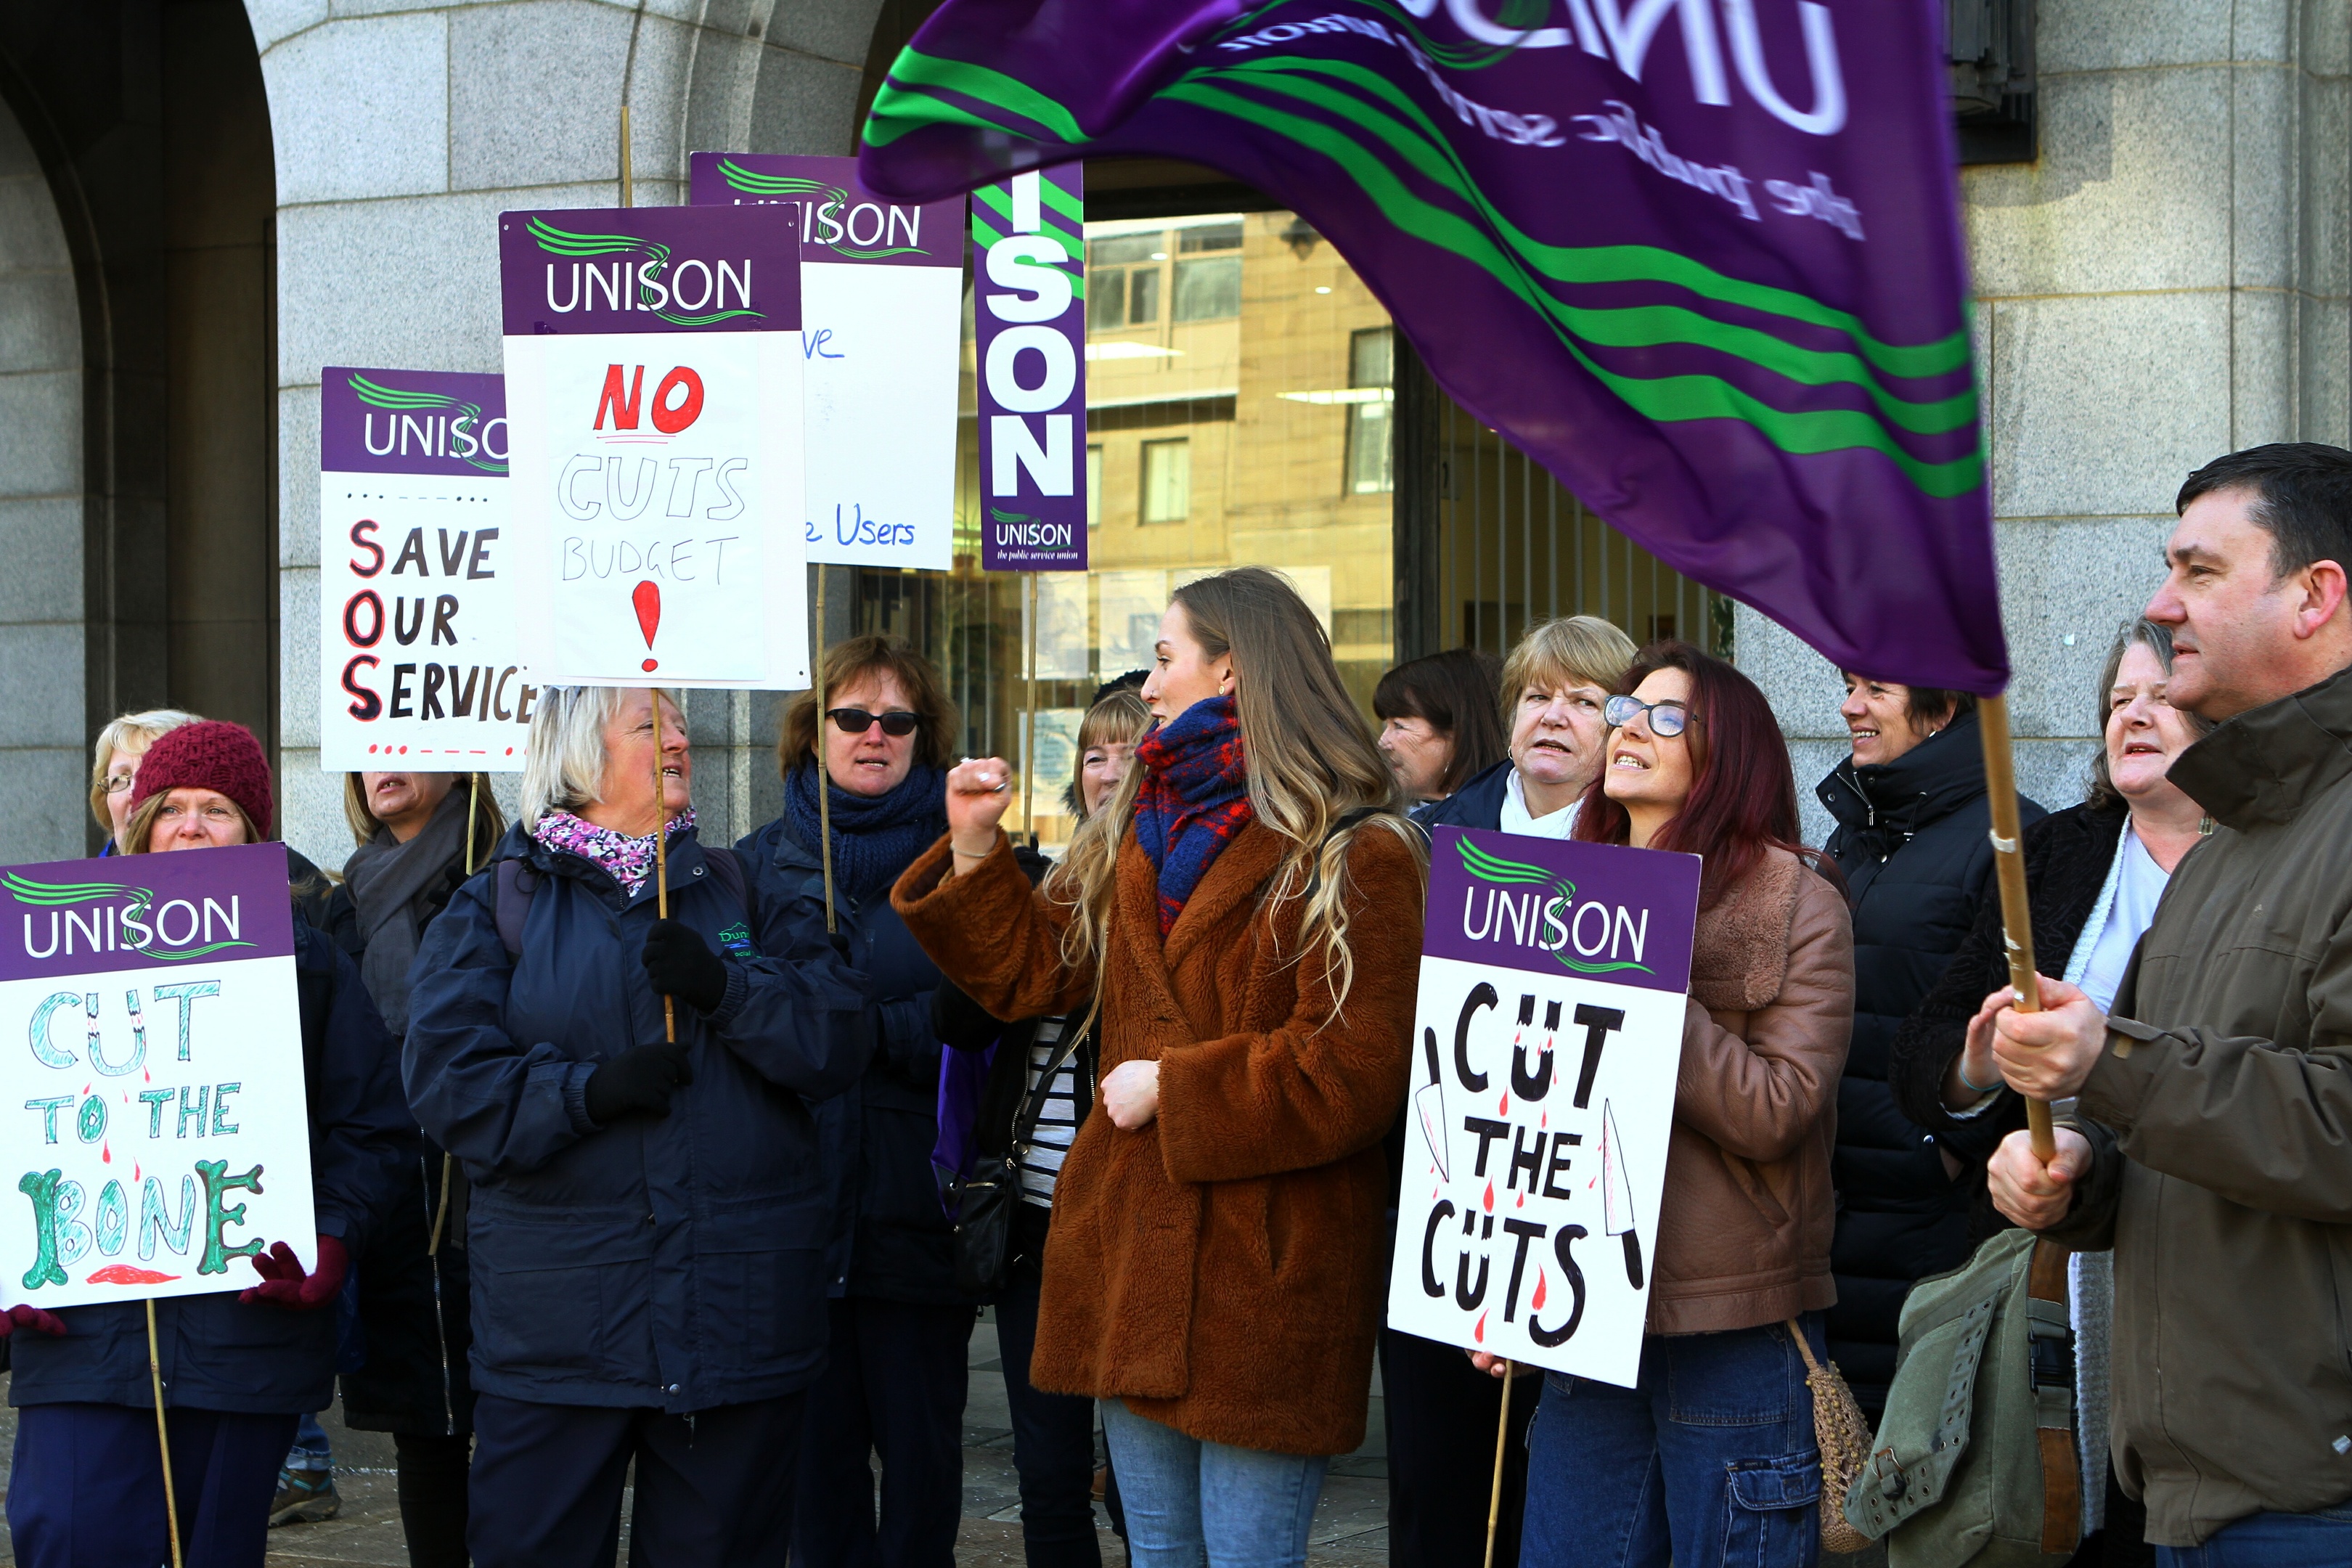 Anti-cuts protesters in the City Square before the Dundee City Council budget meeting last year.